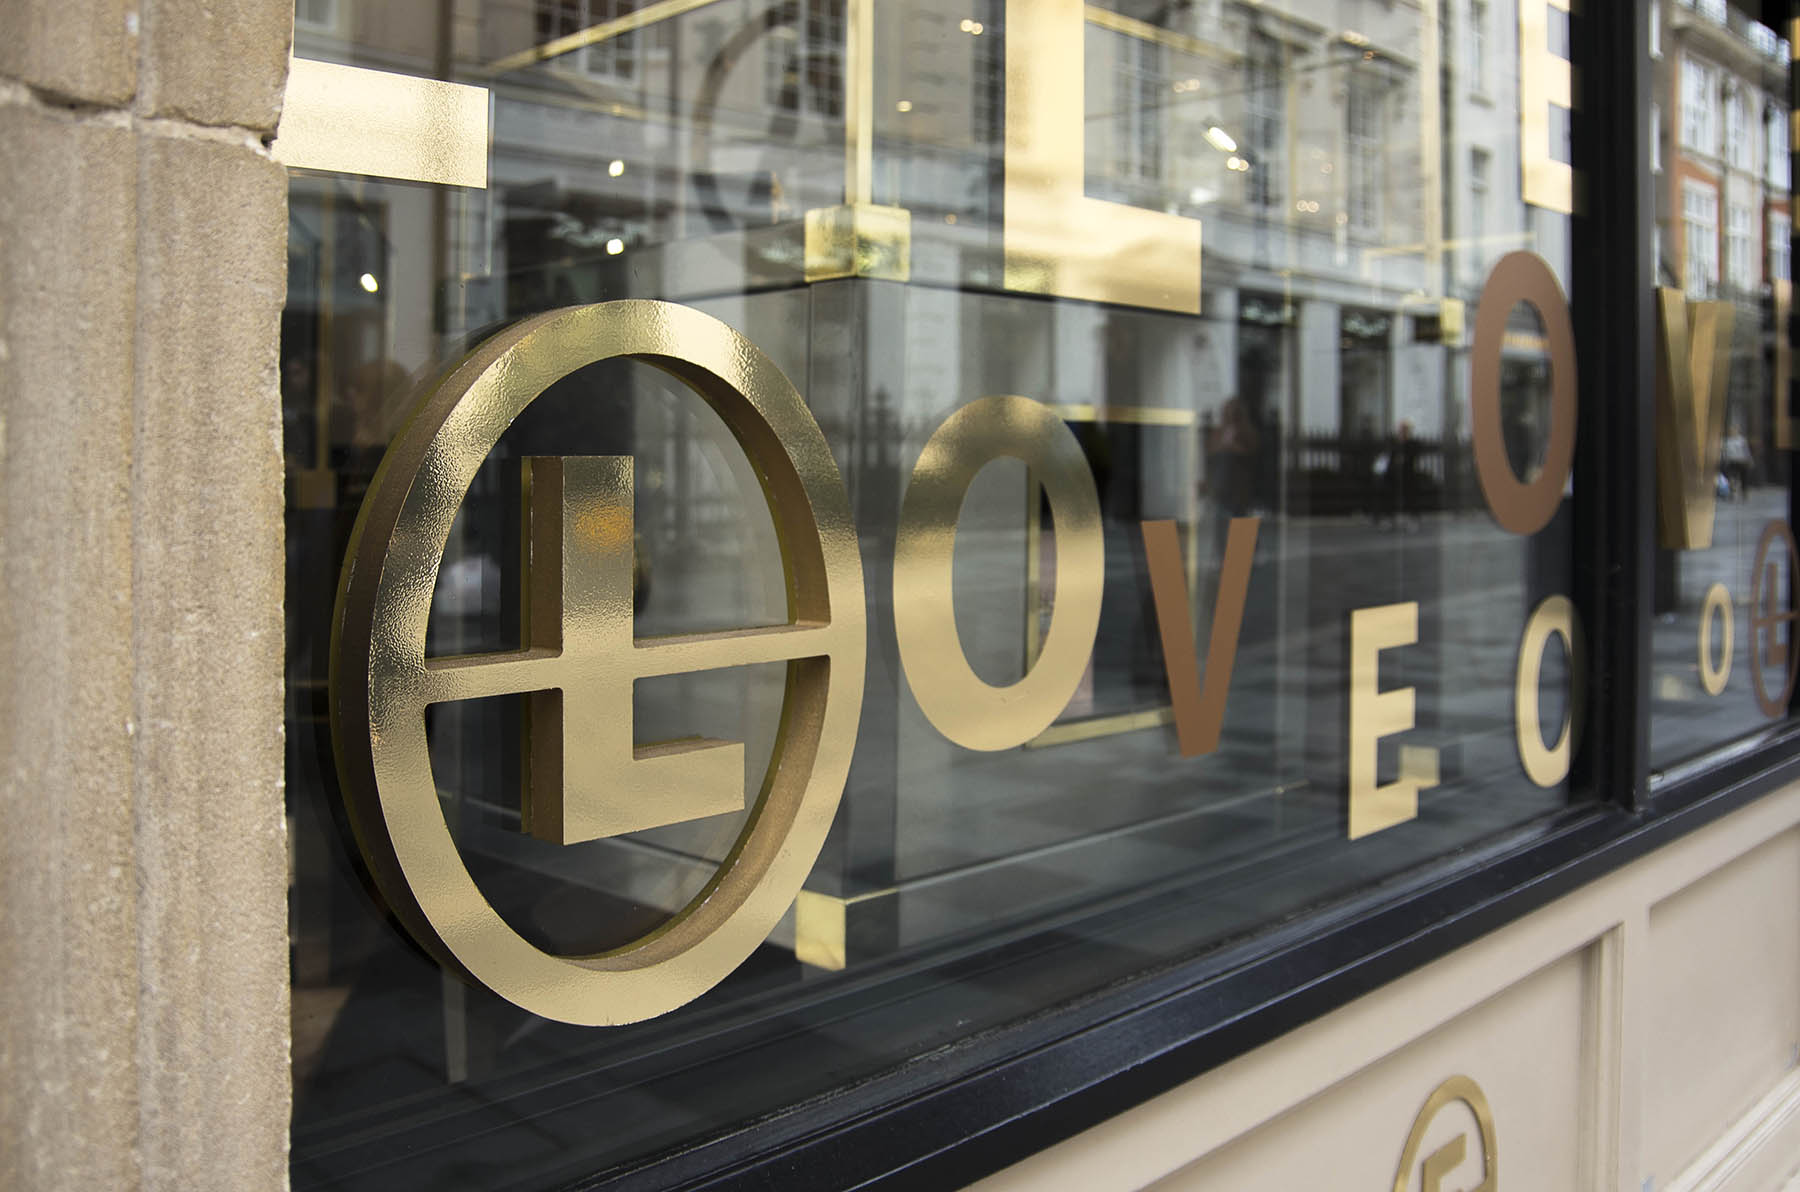 Annoushka Initials window display - gold and copper letters spelling Love